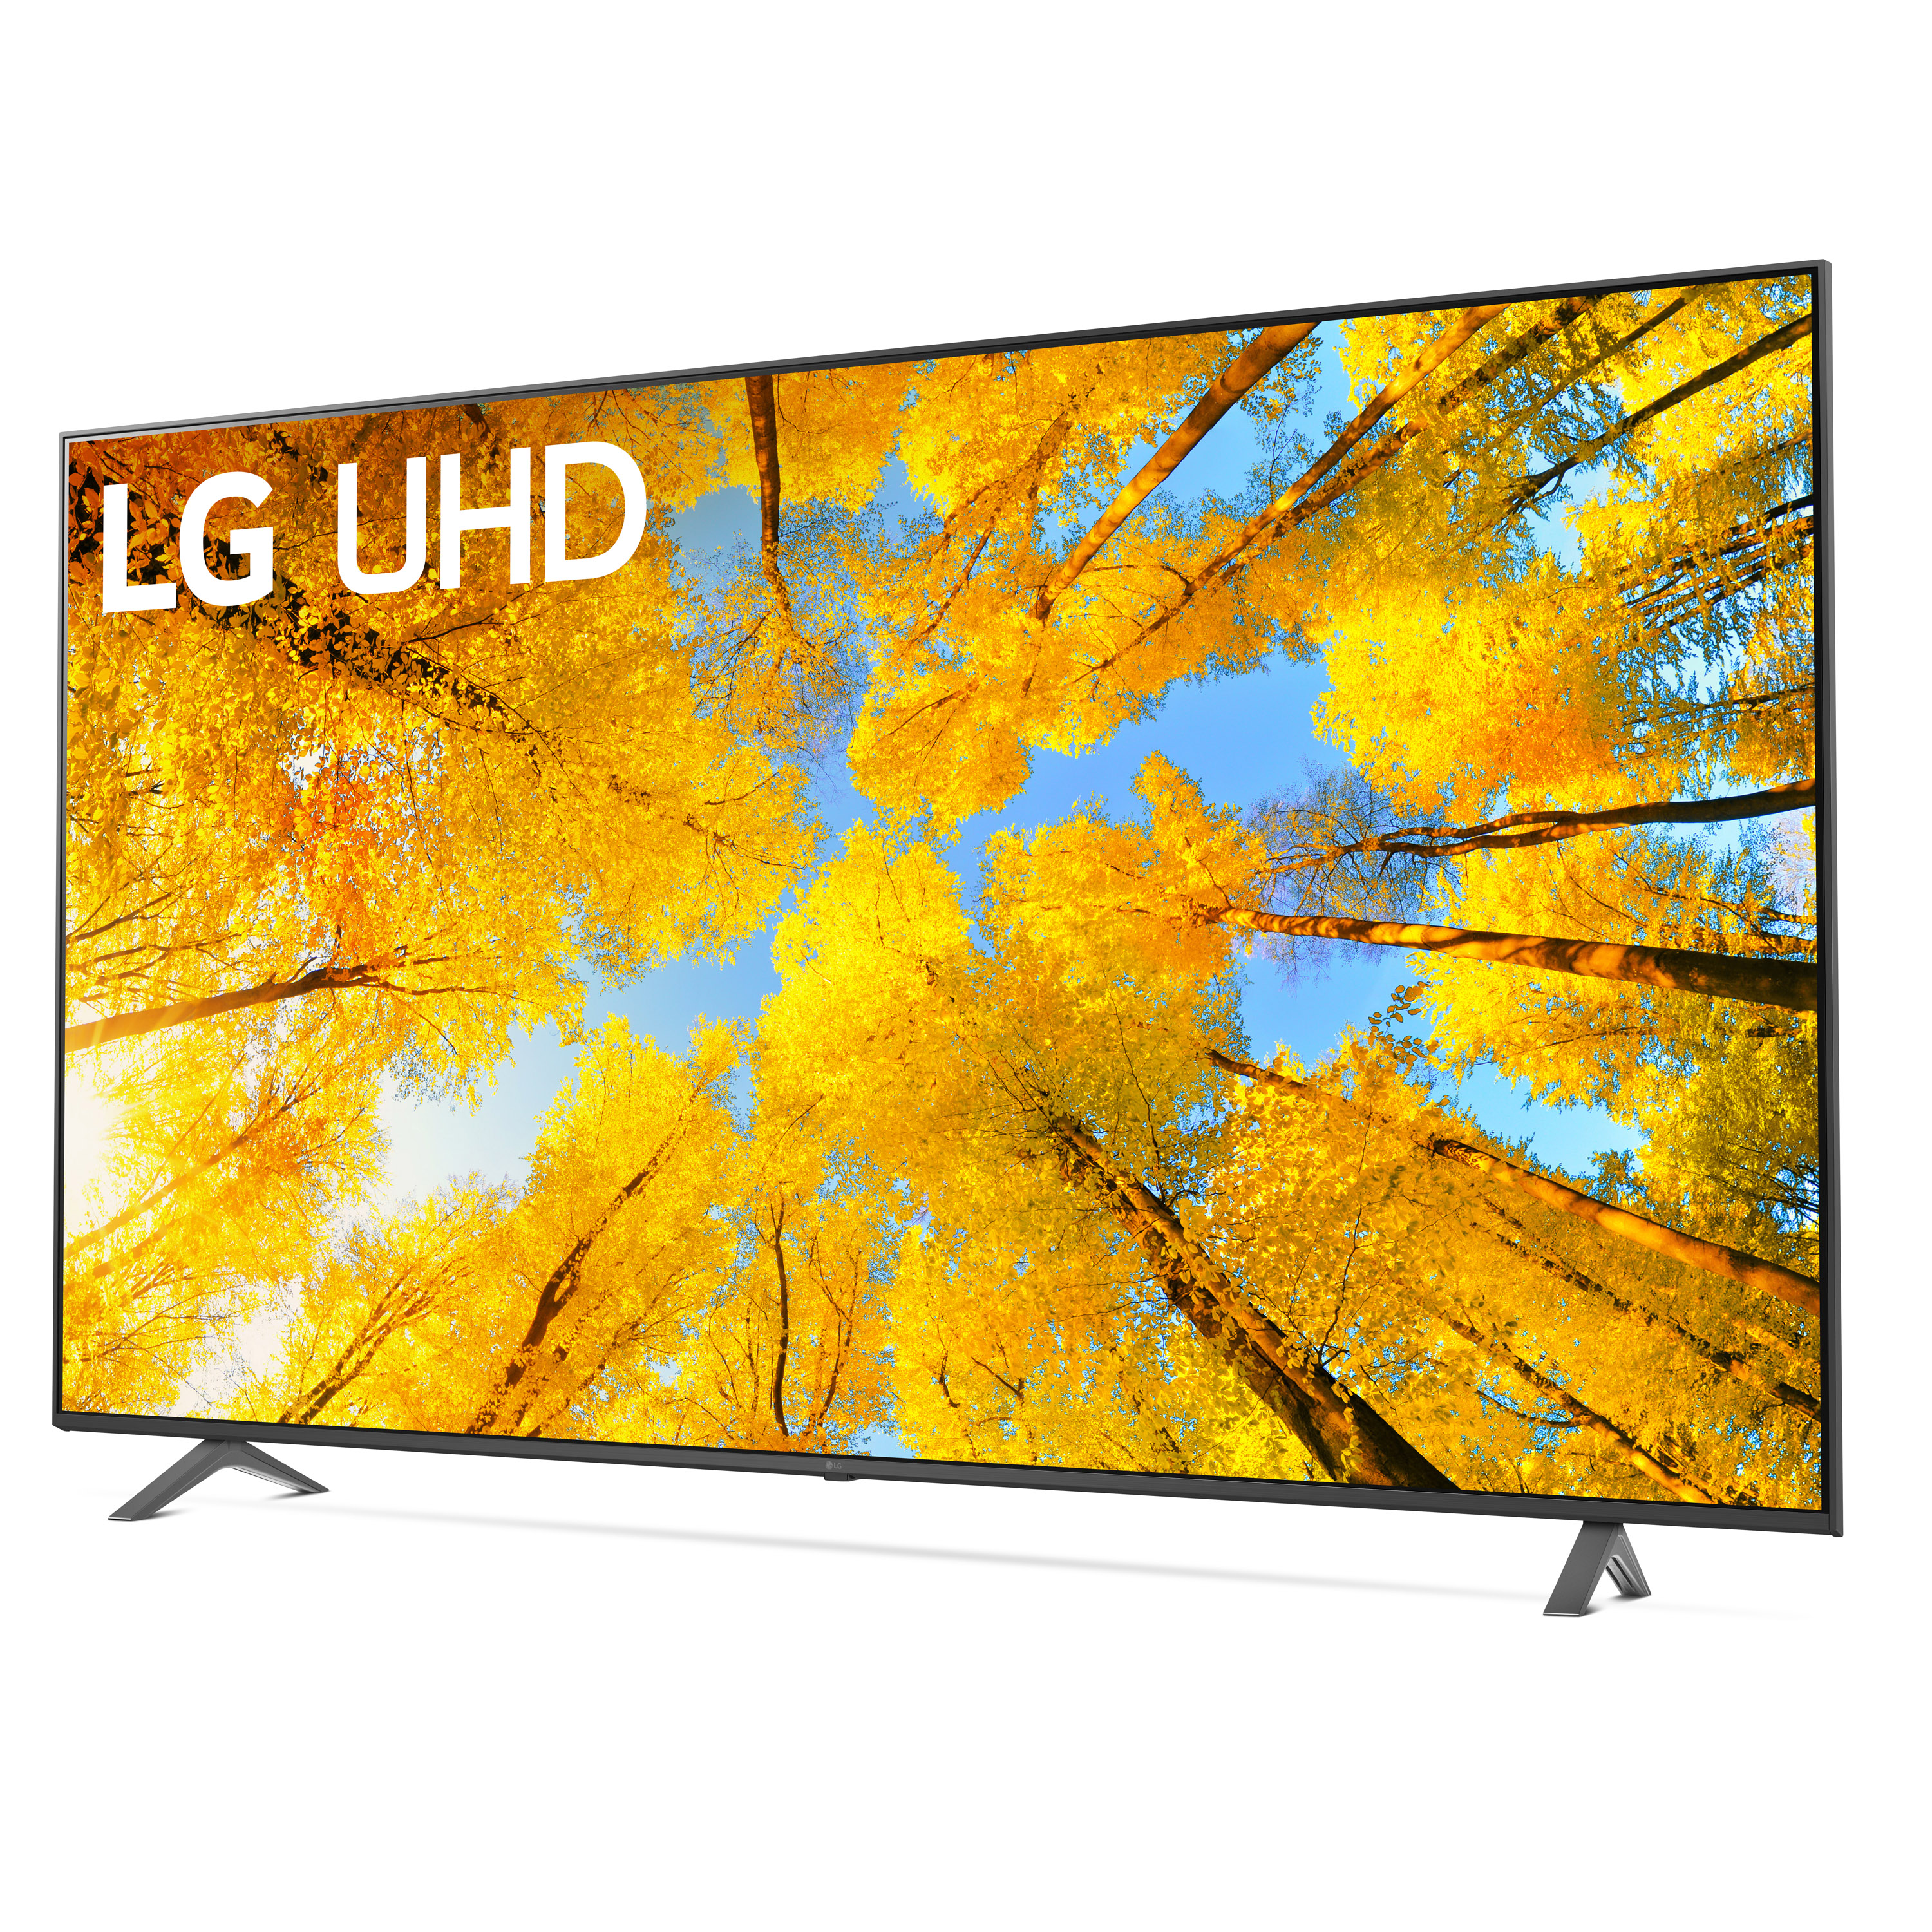 LG 86 inches Class 4K UHD 2160P WebOS22 Smart TV with Active HDR UQ7590 Series 86UQ7590PUD - image 2 of 14